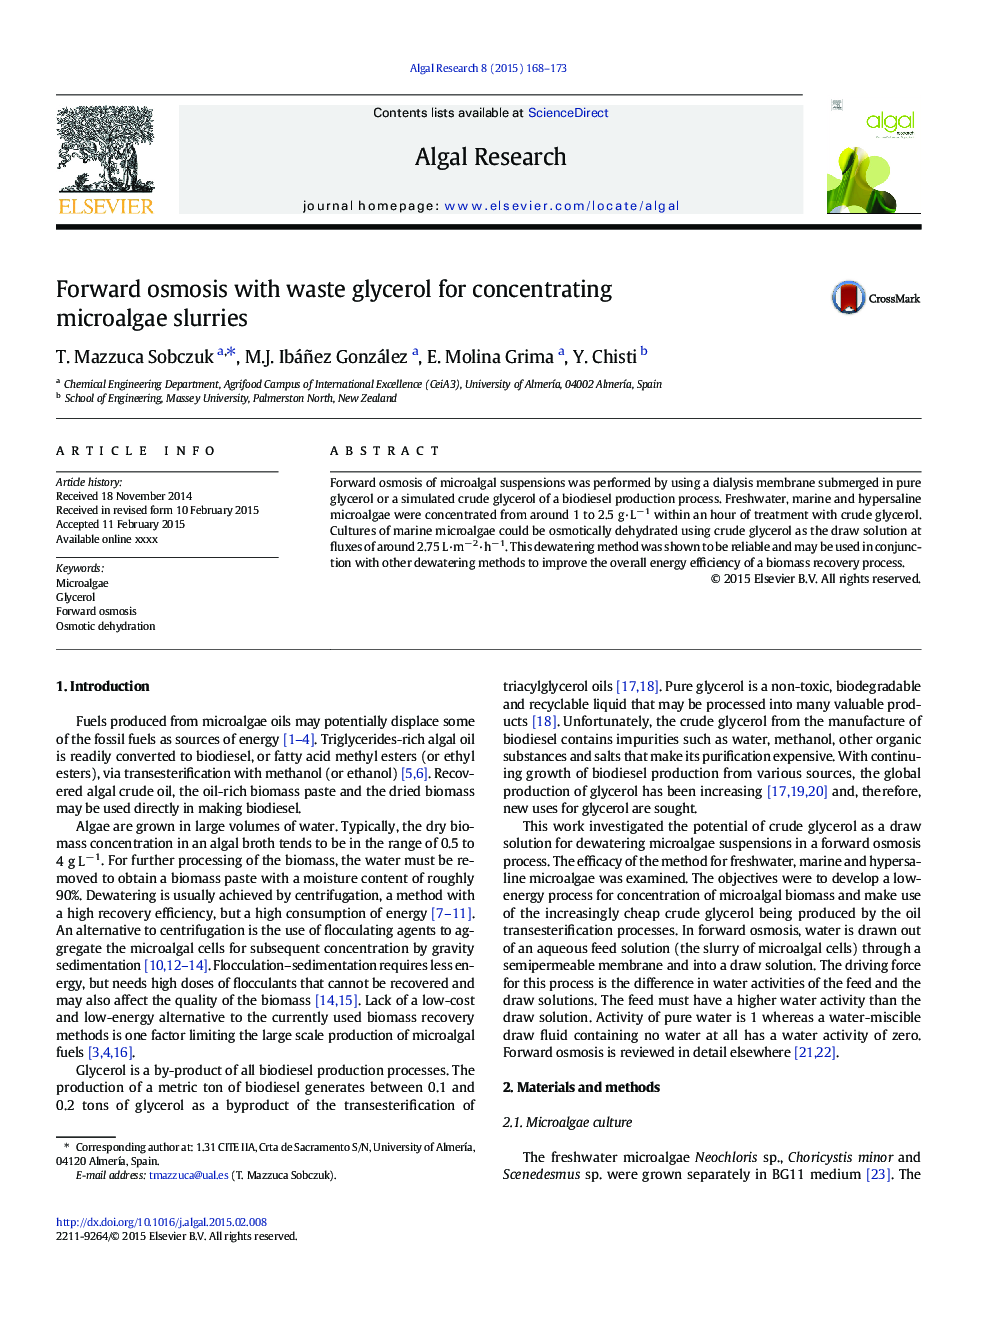 Forward osmosis with waste glycerol for concentrating microalgae slurries